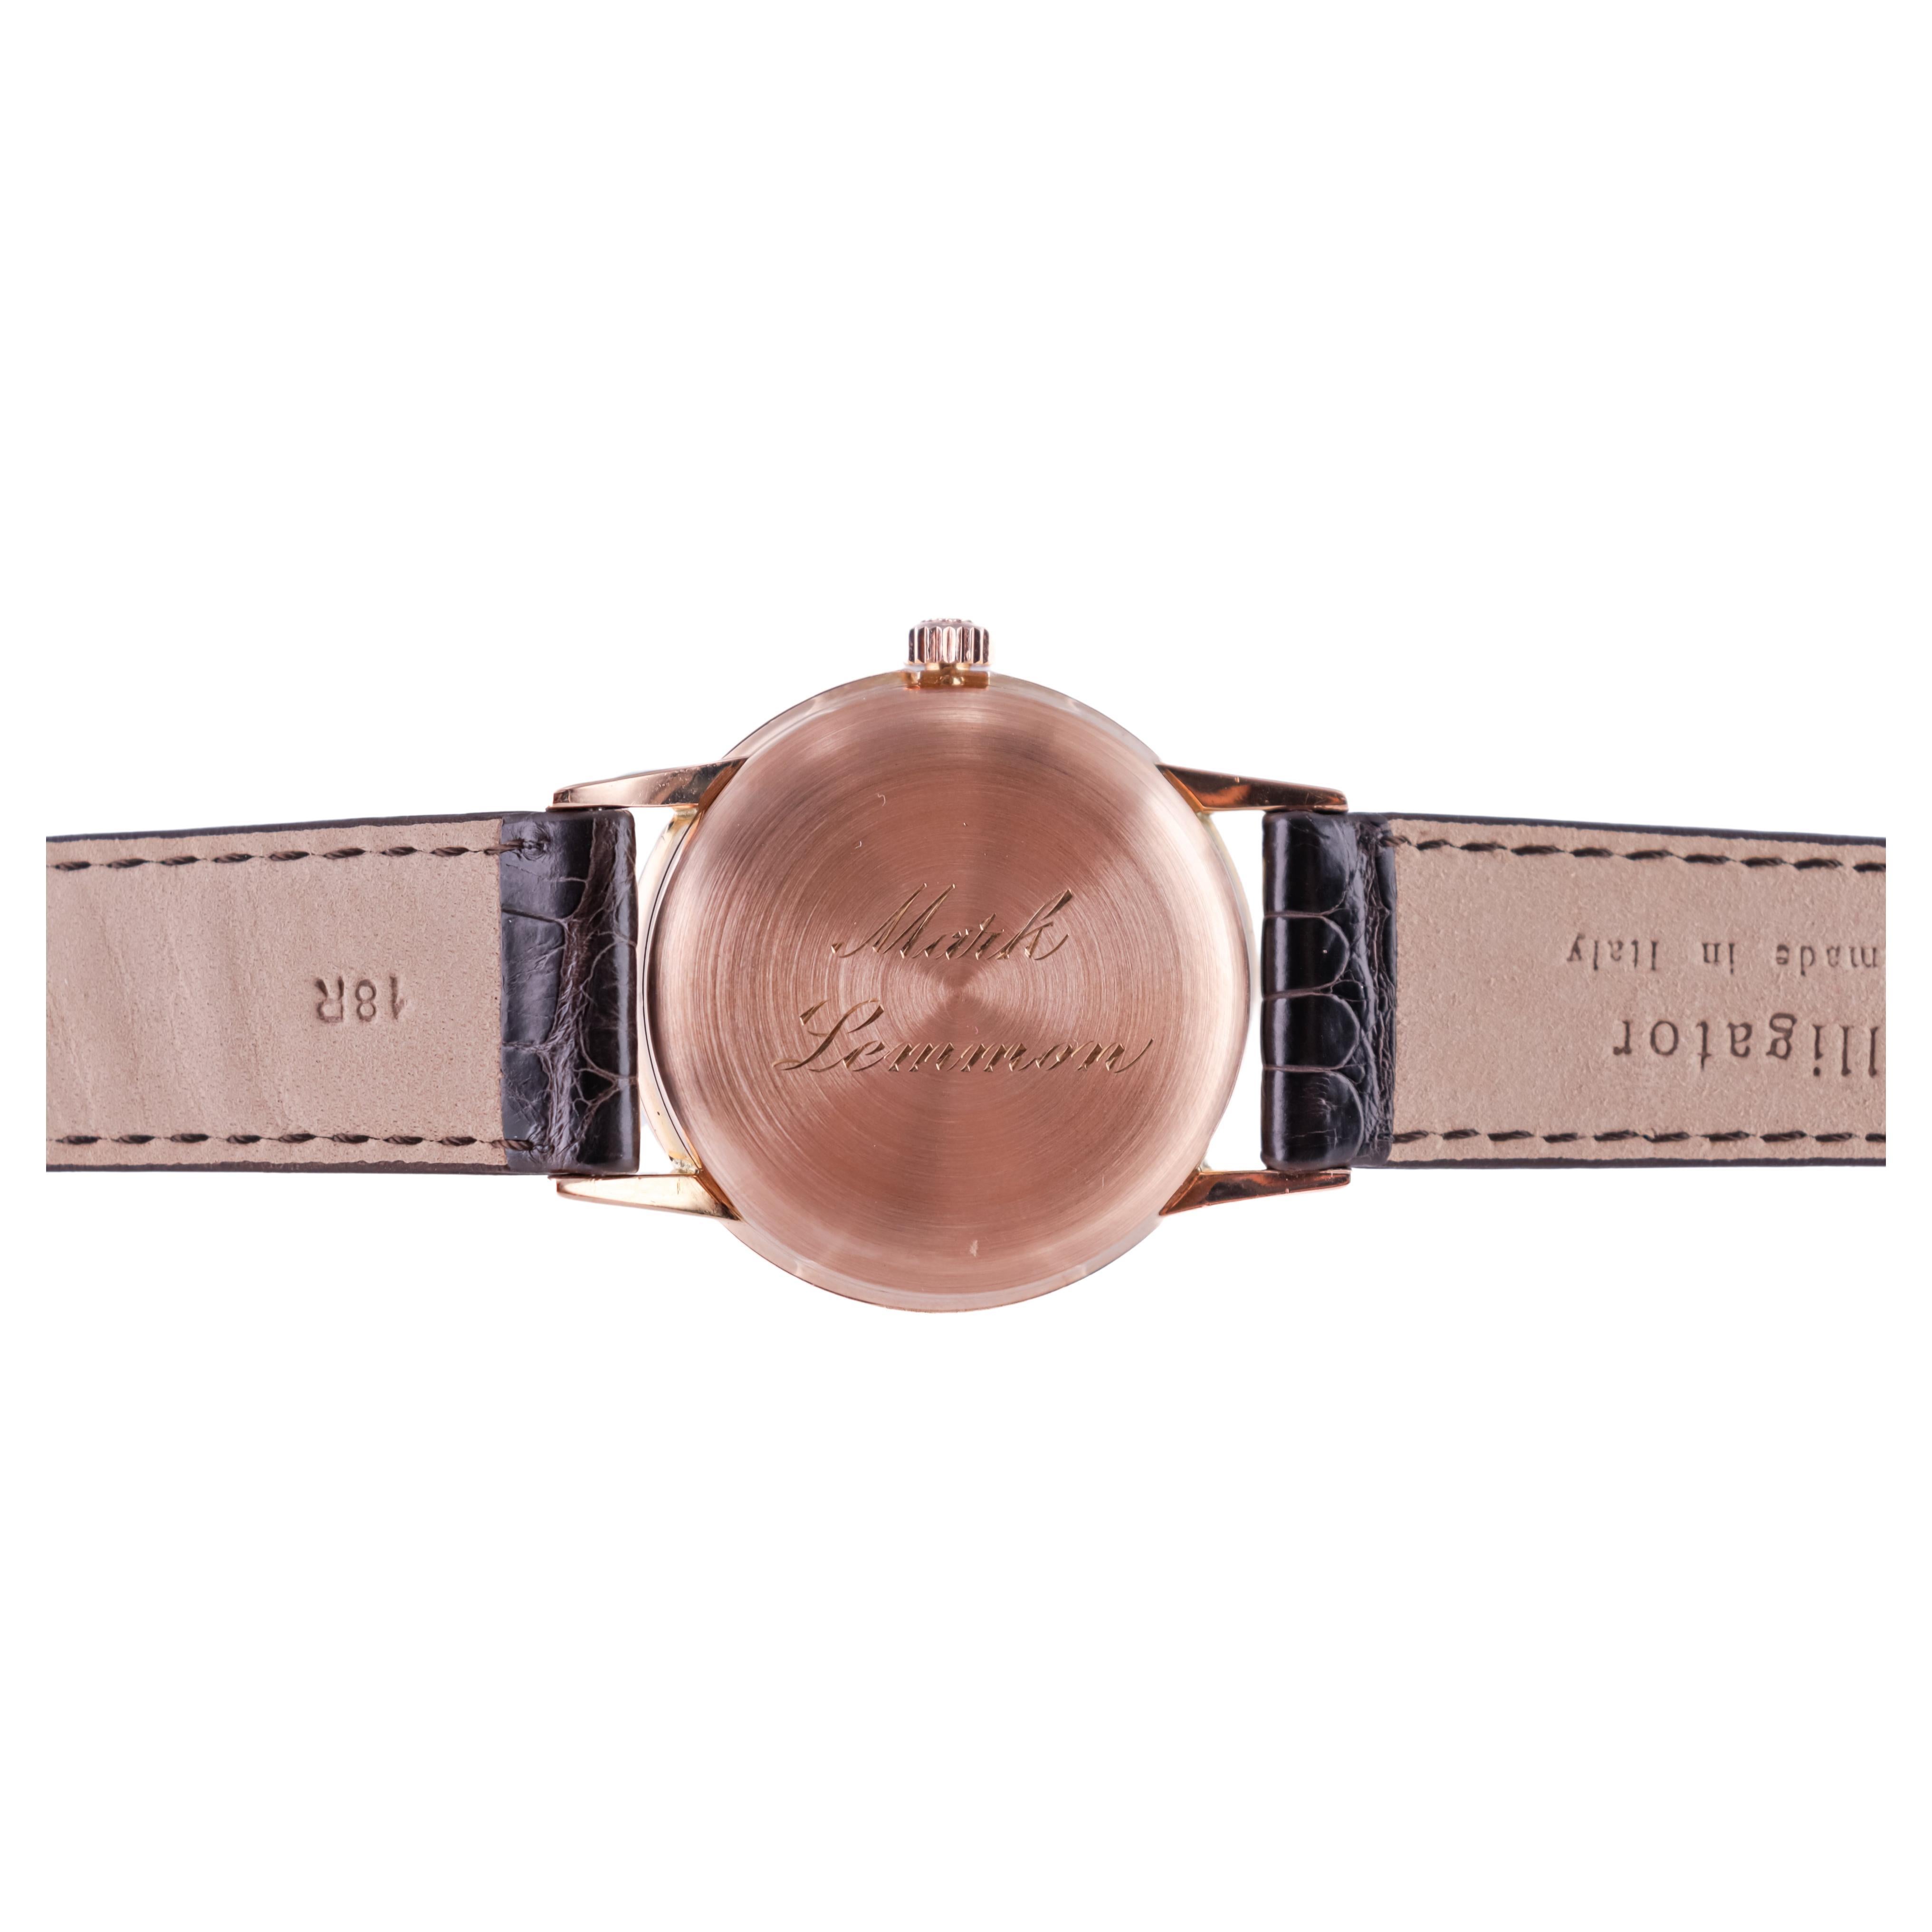 Patek Philippe 18kt. Rose Gold Art Deco Round Original Dial from 1940s For Sale 4